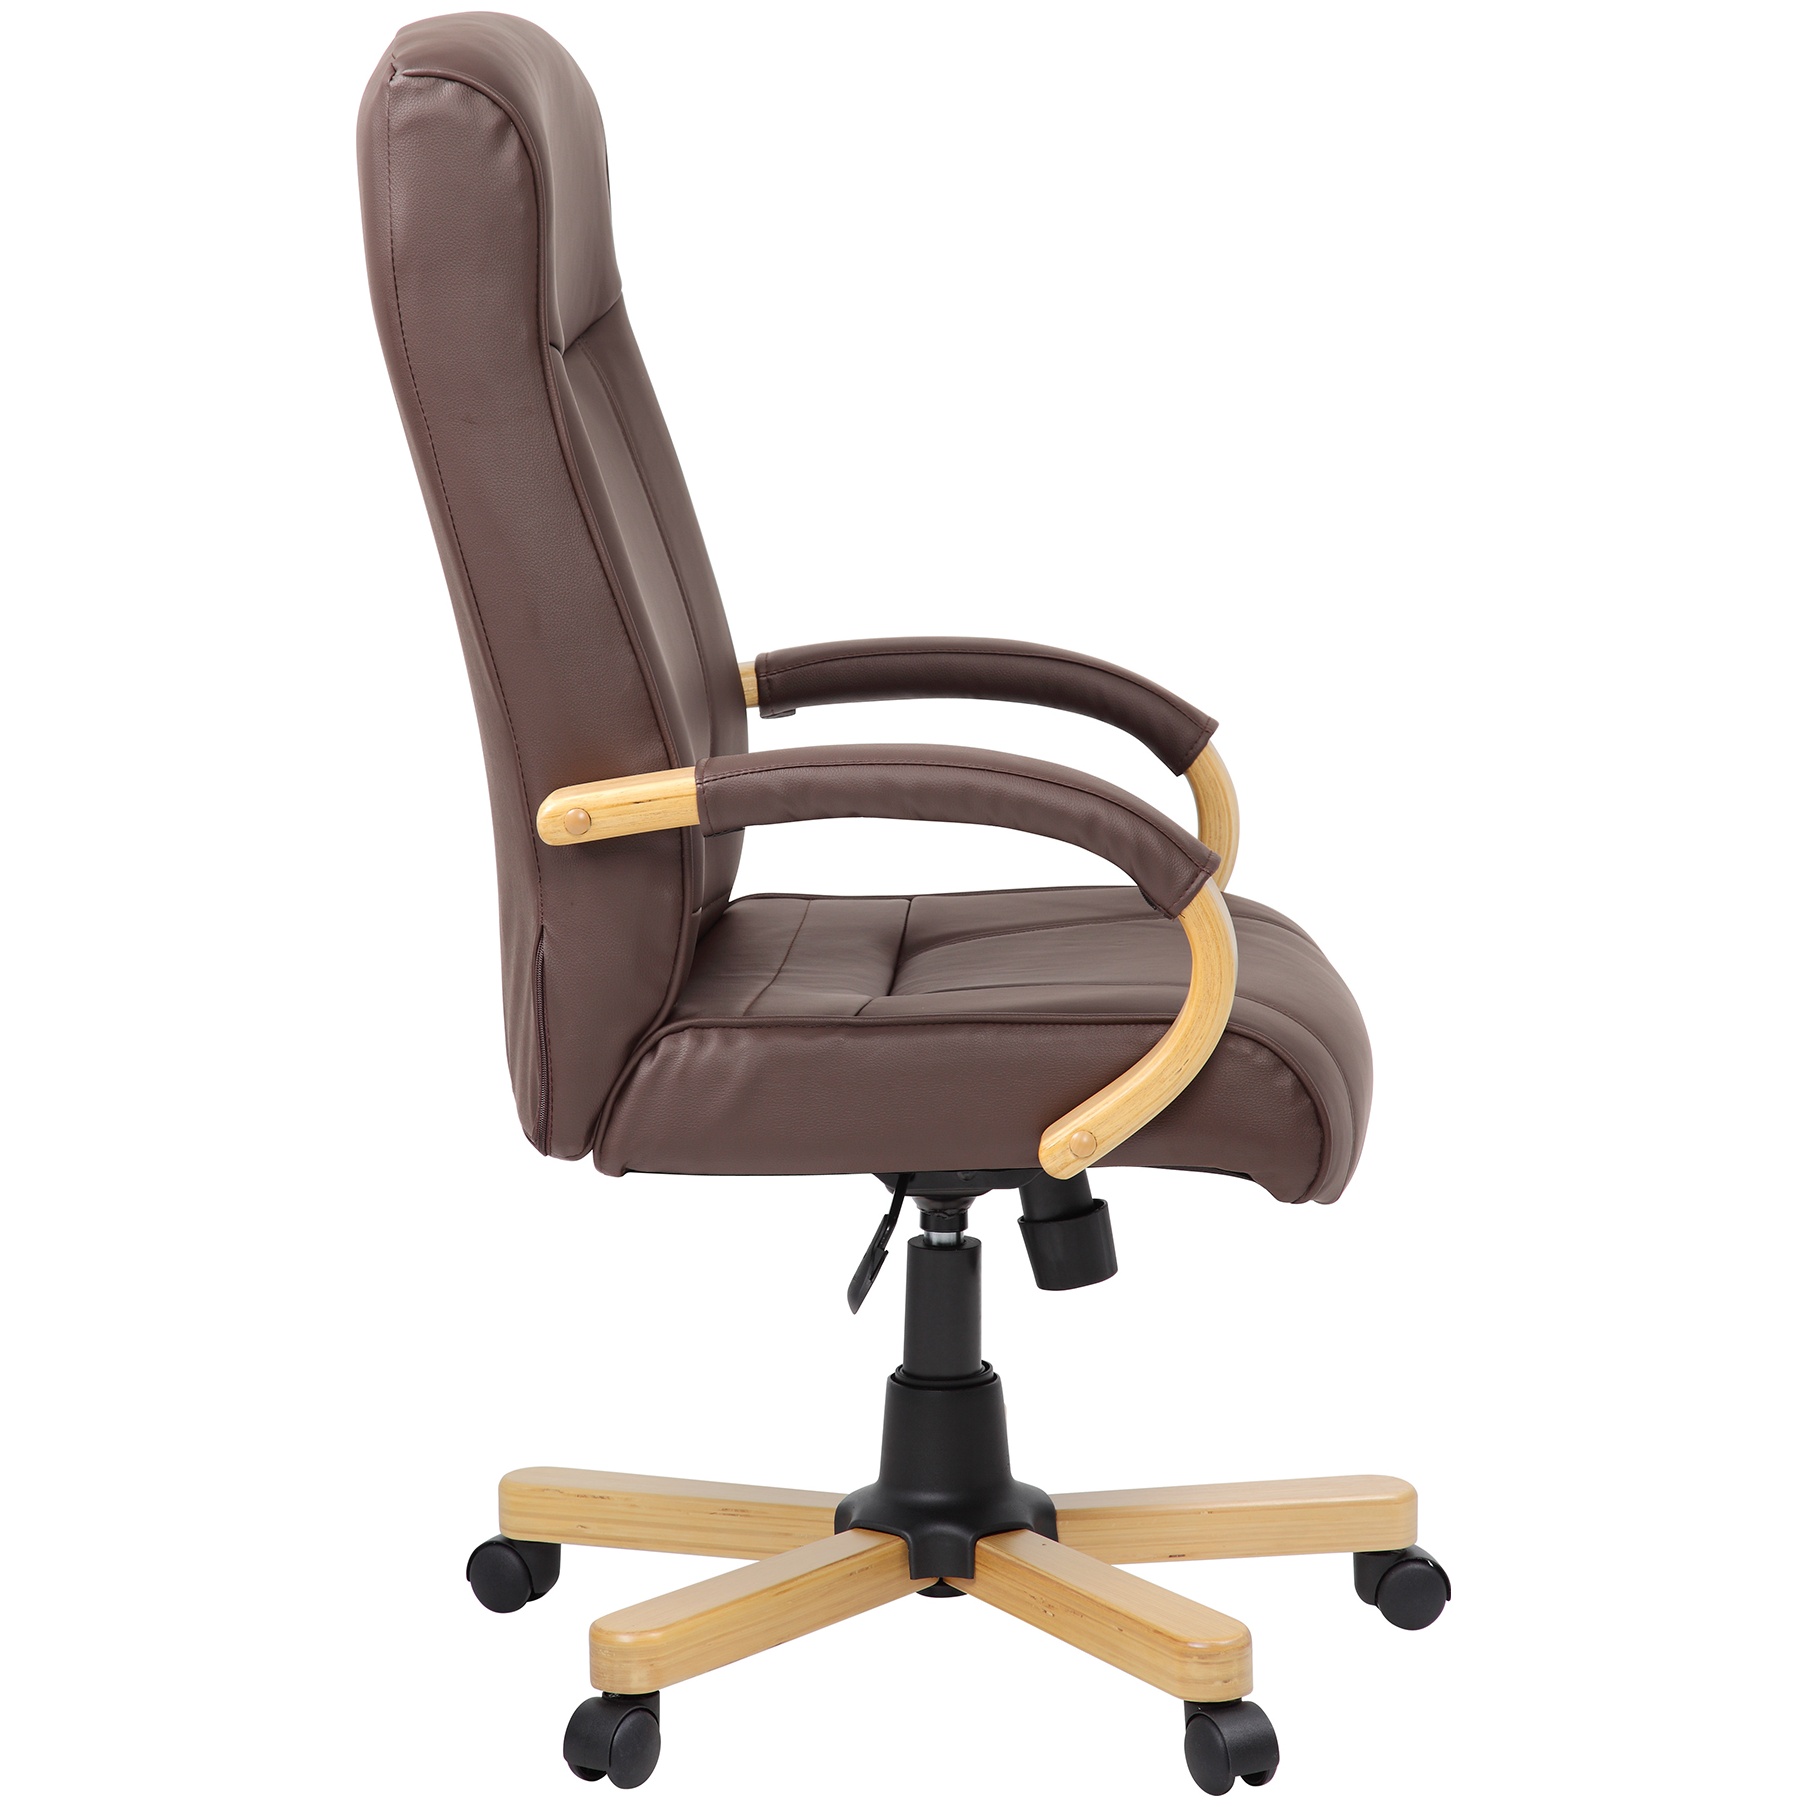 Farnham Brown Leather Office Chair | Executive Office Chairs